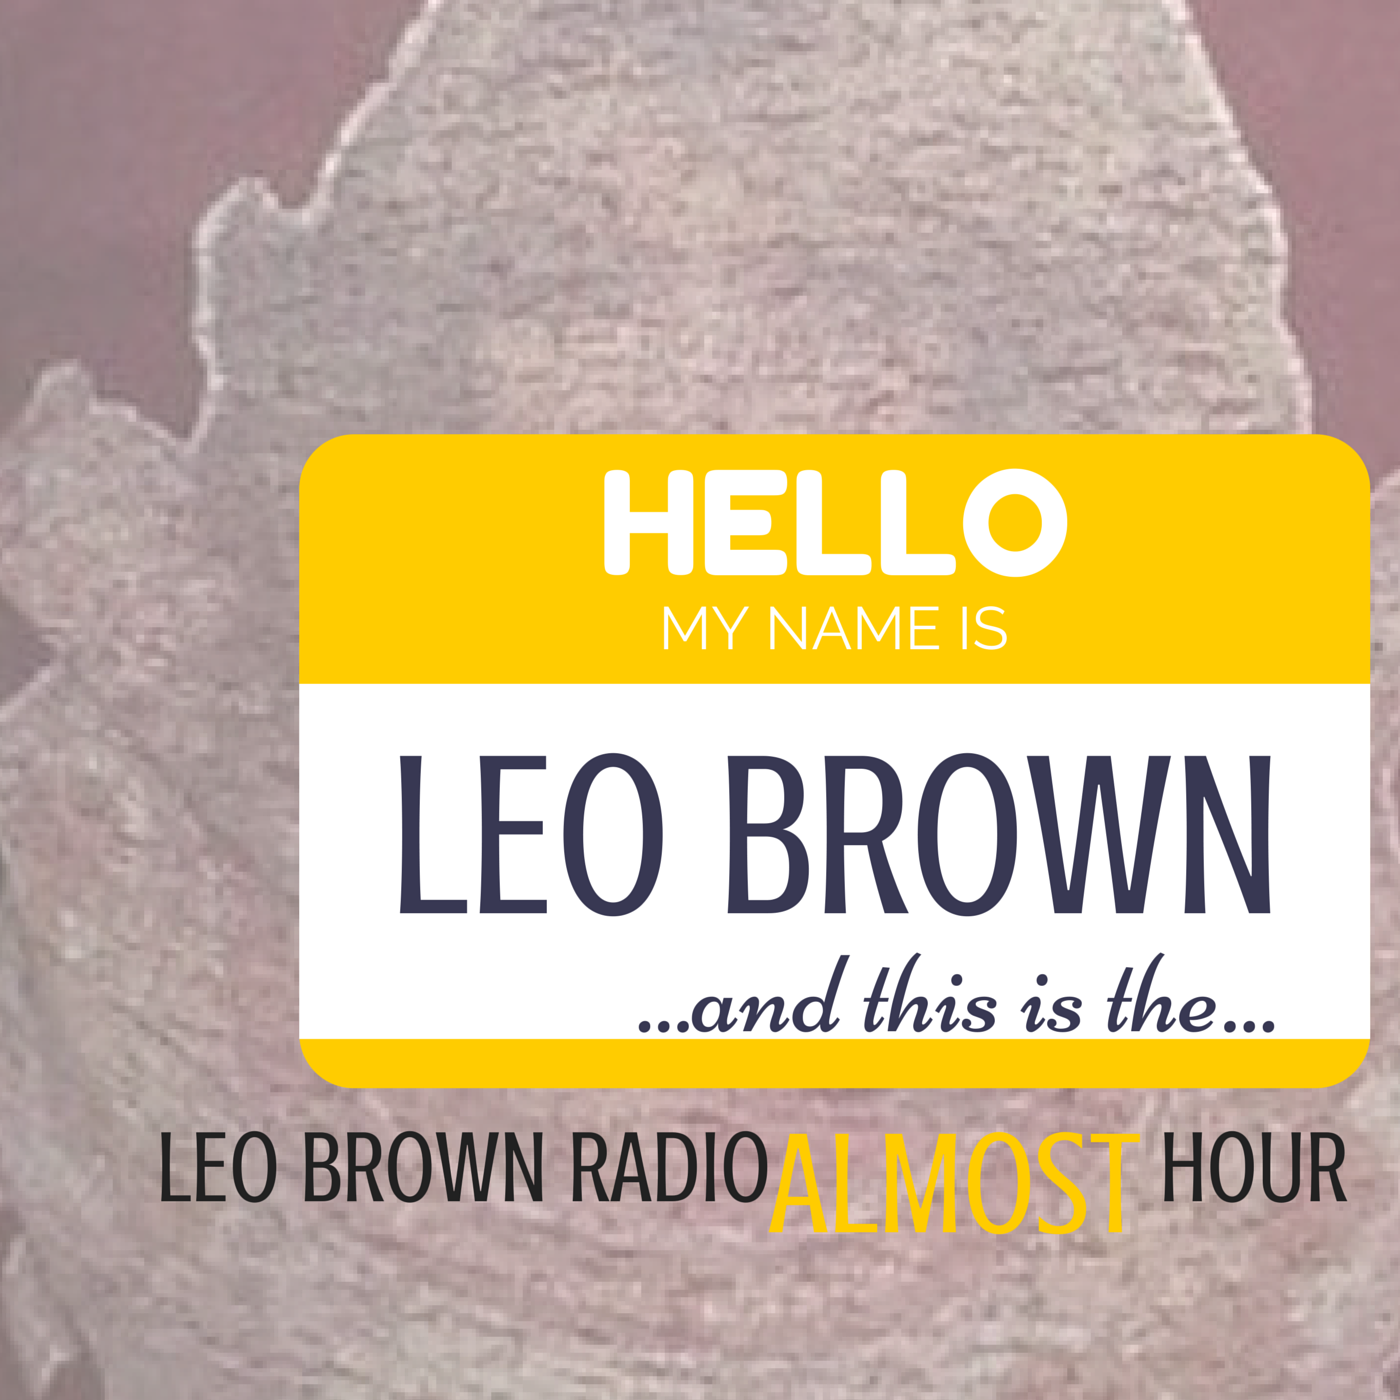 Leo Brown Almost Hour 3/20/17